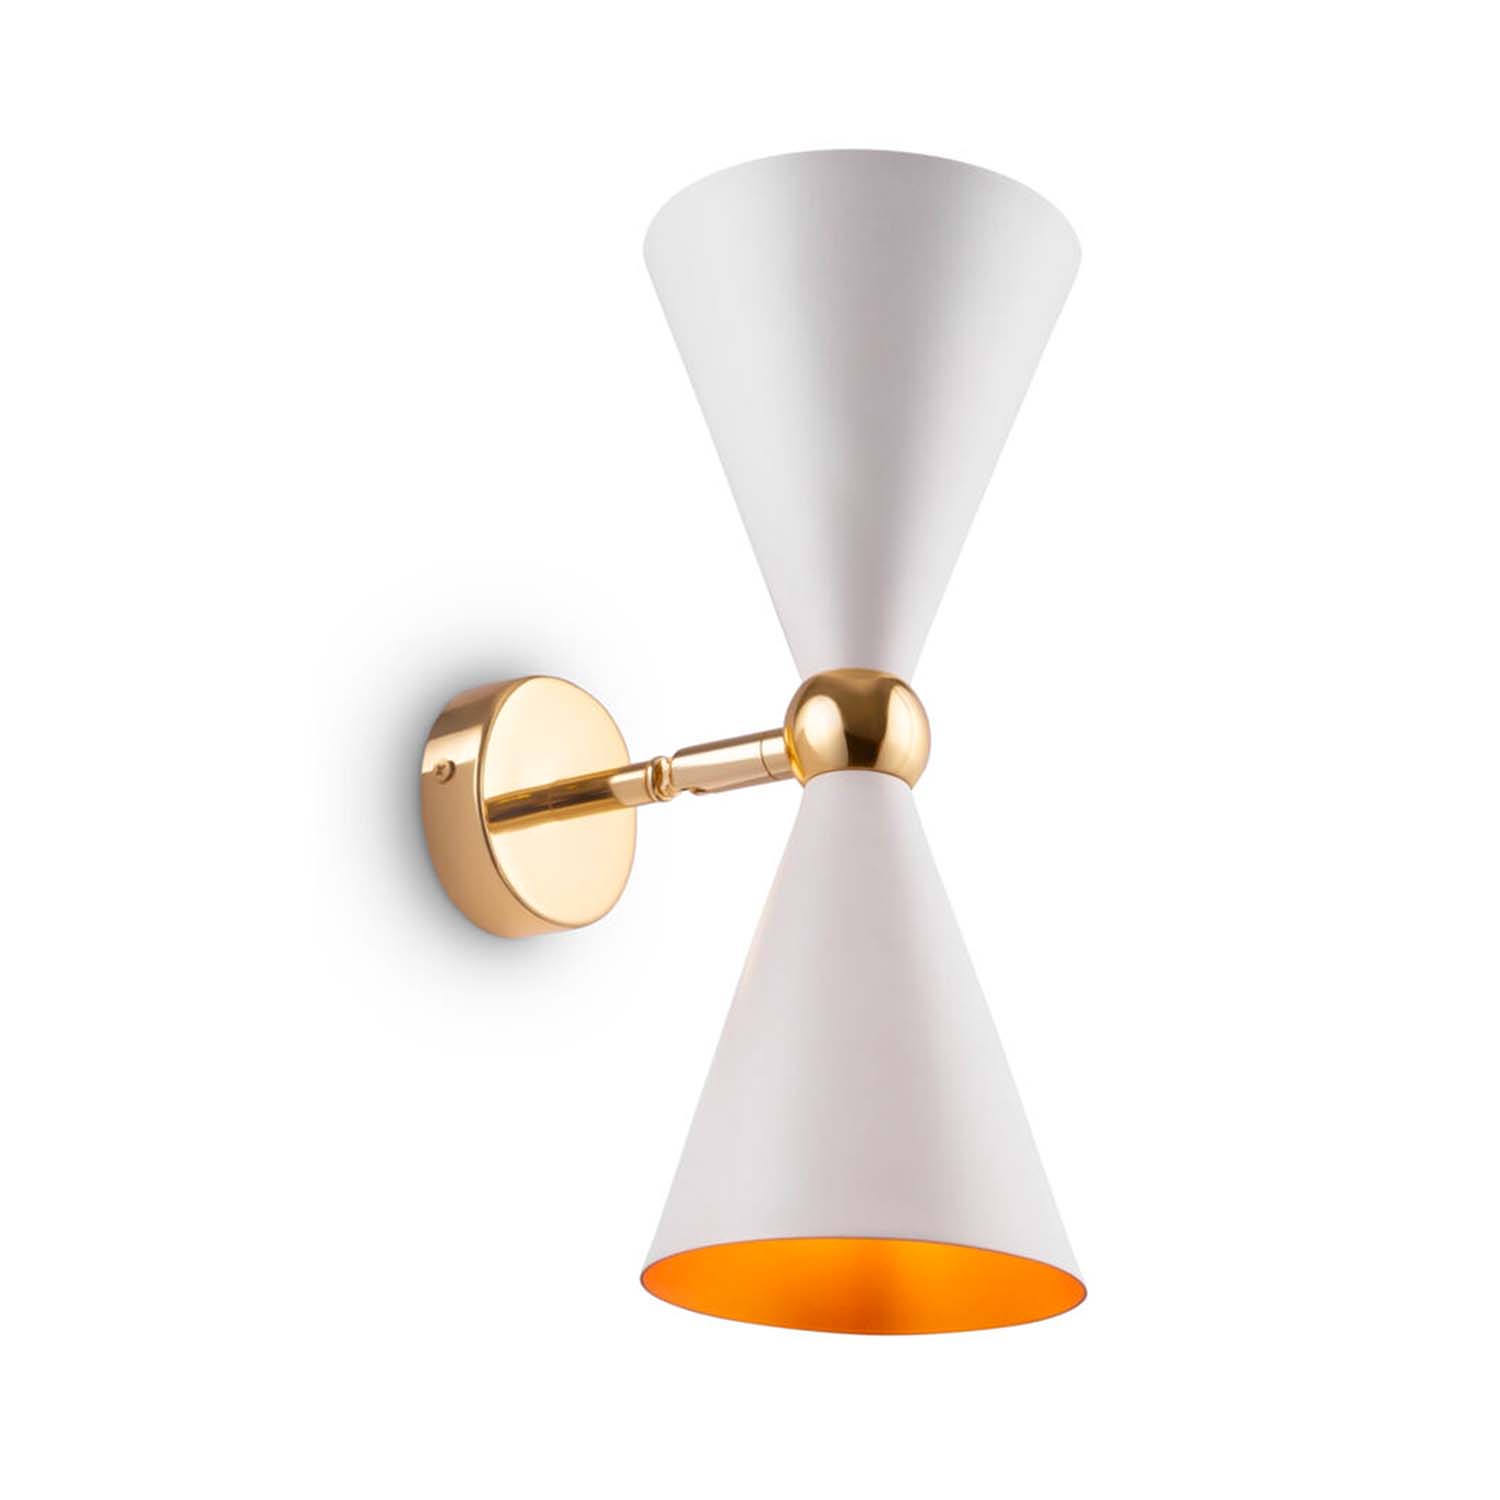 VESPER - Conical black or white and gold wall light